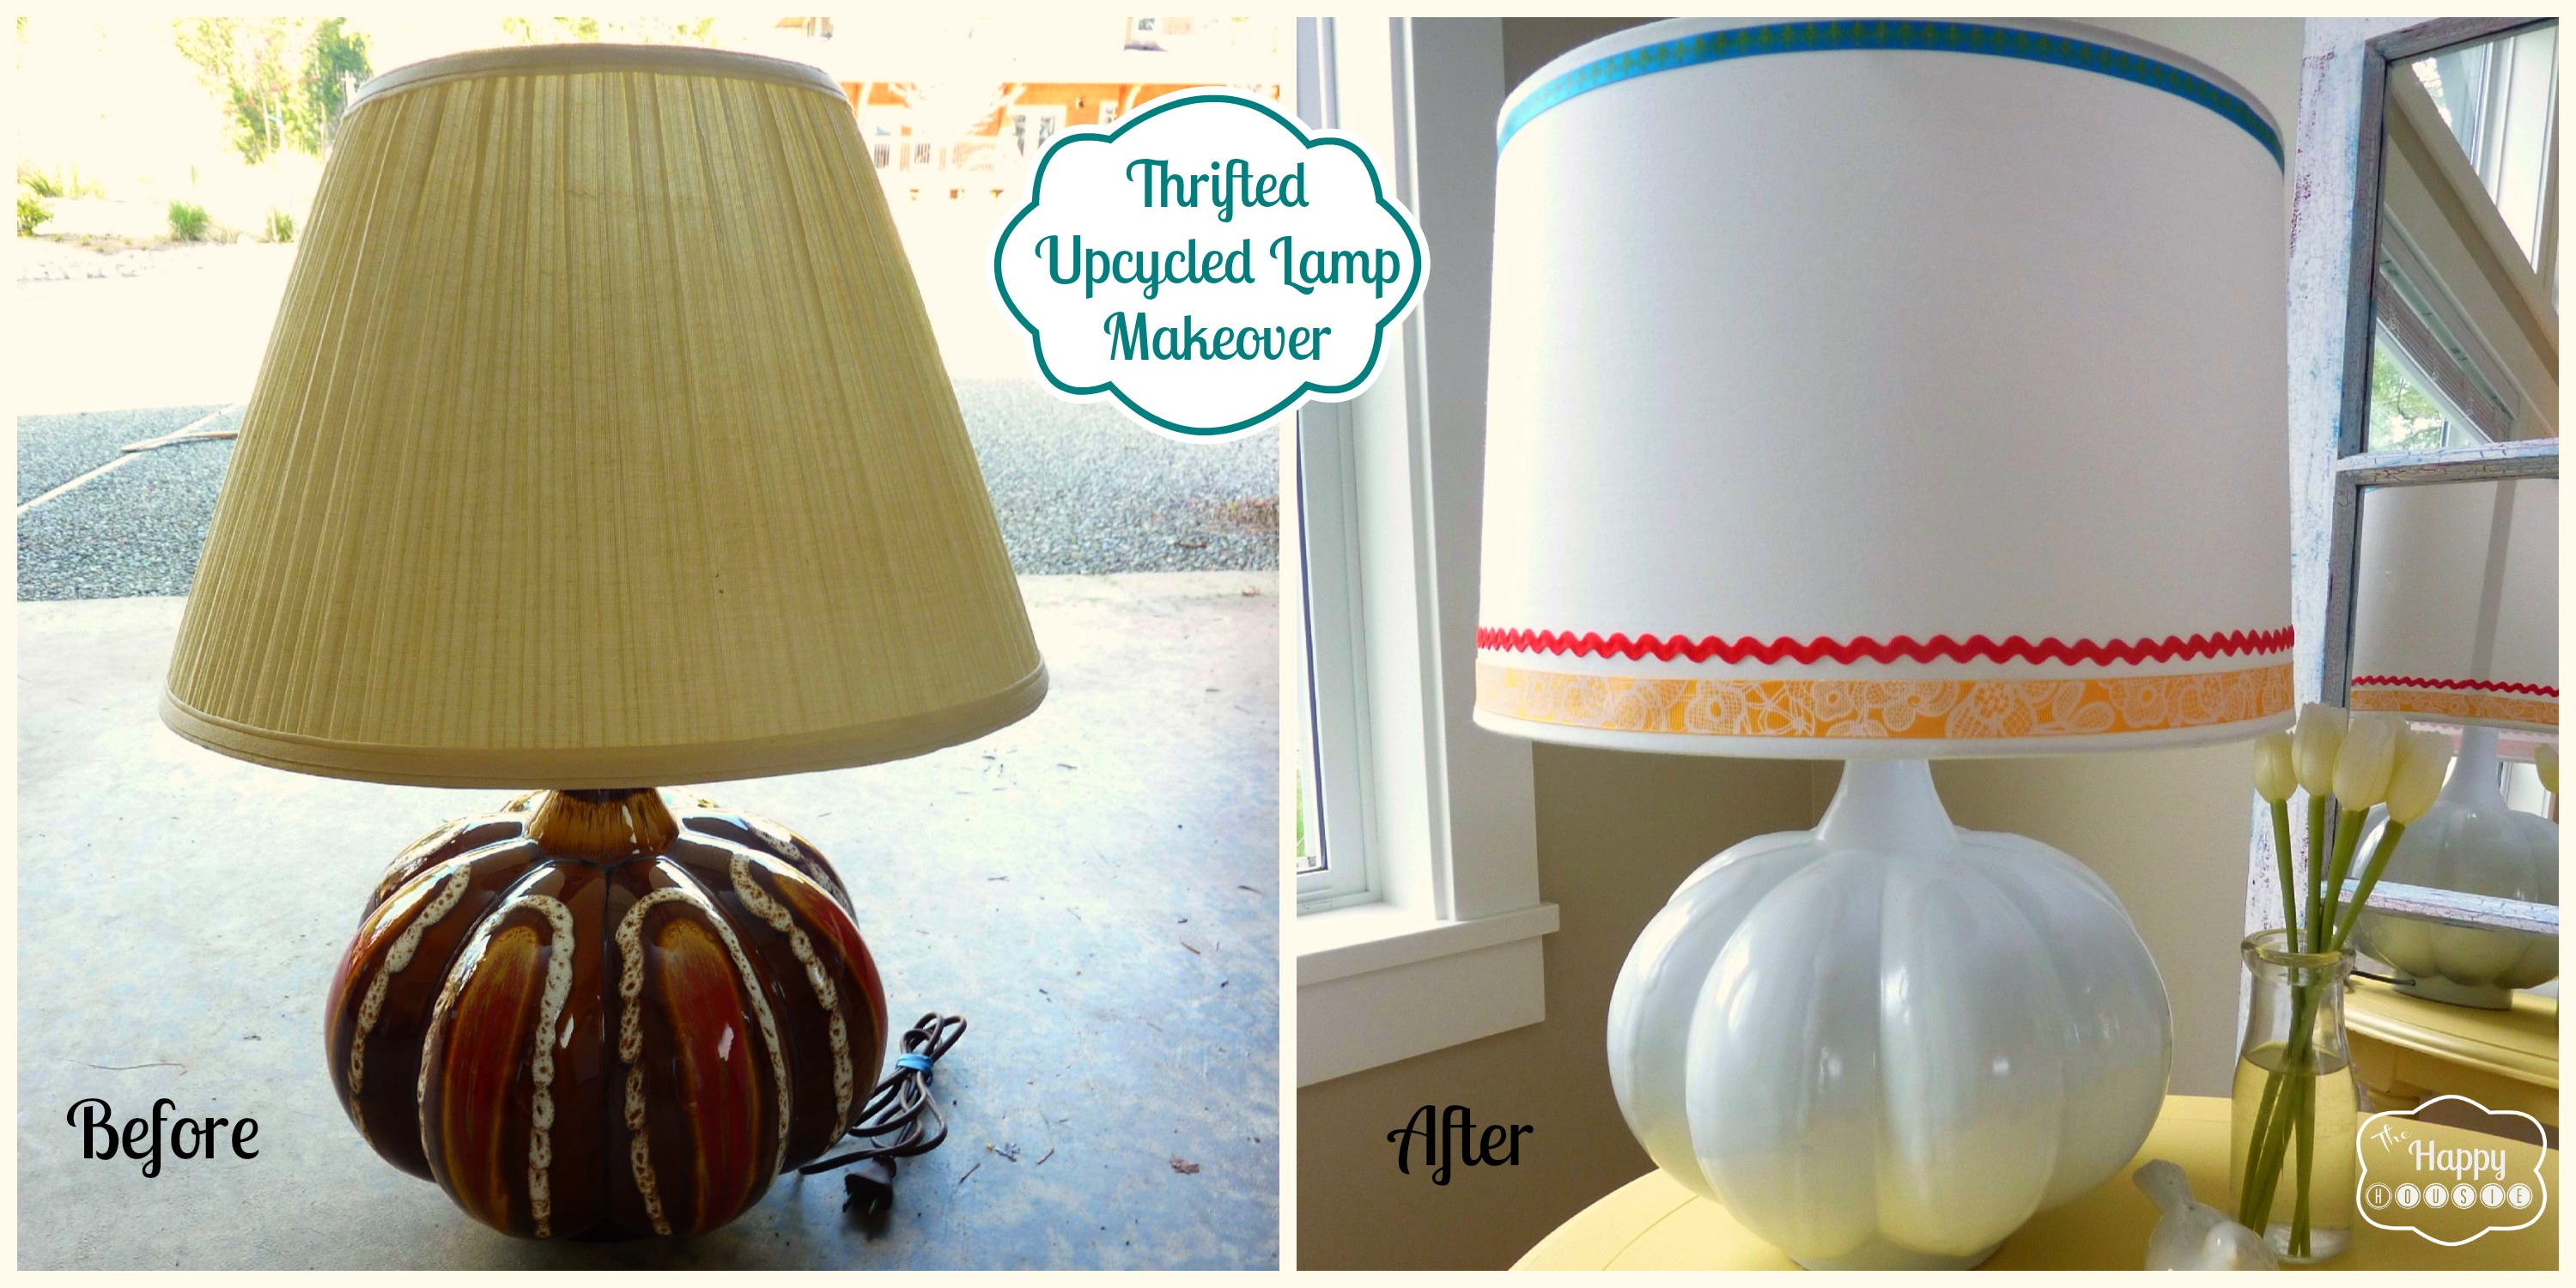 Light Up Your Life: Upcycle a Thrifted Lamp